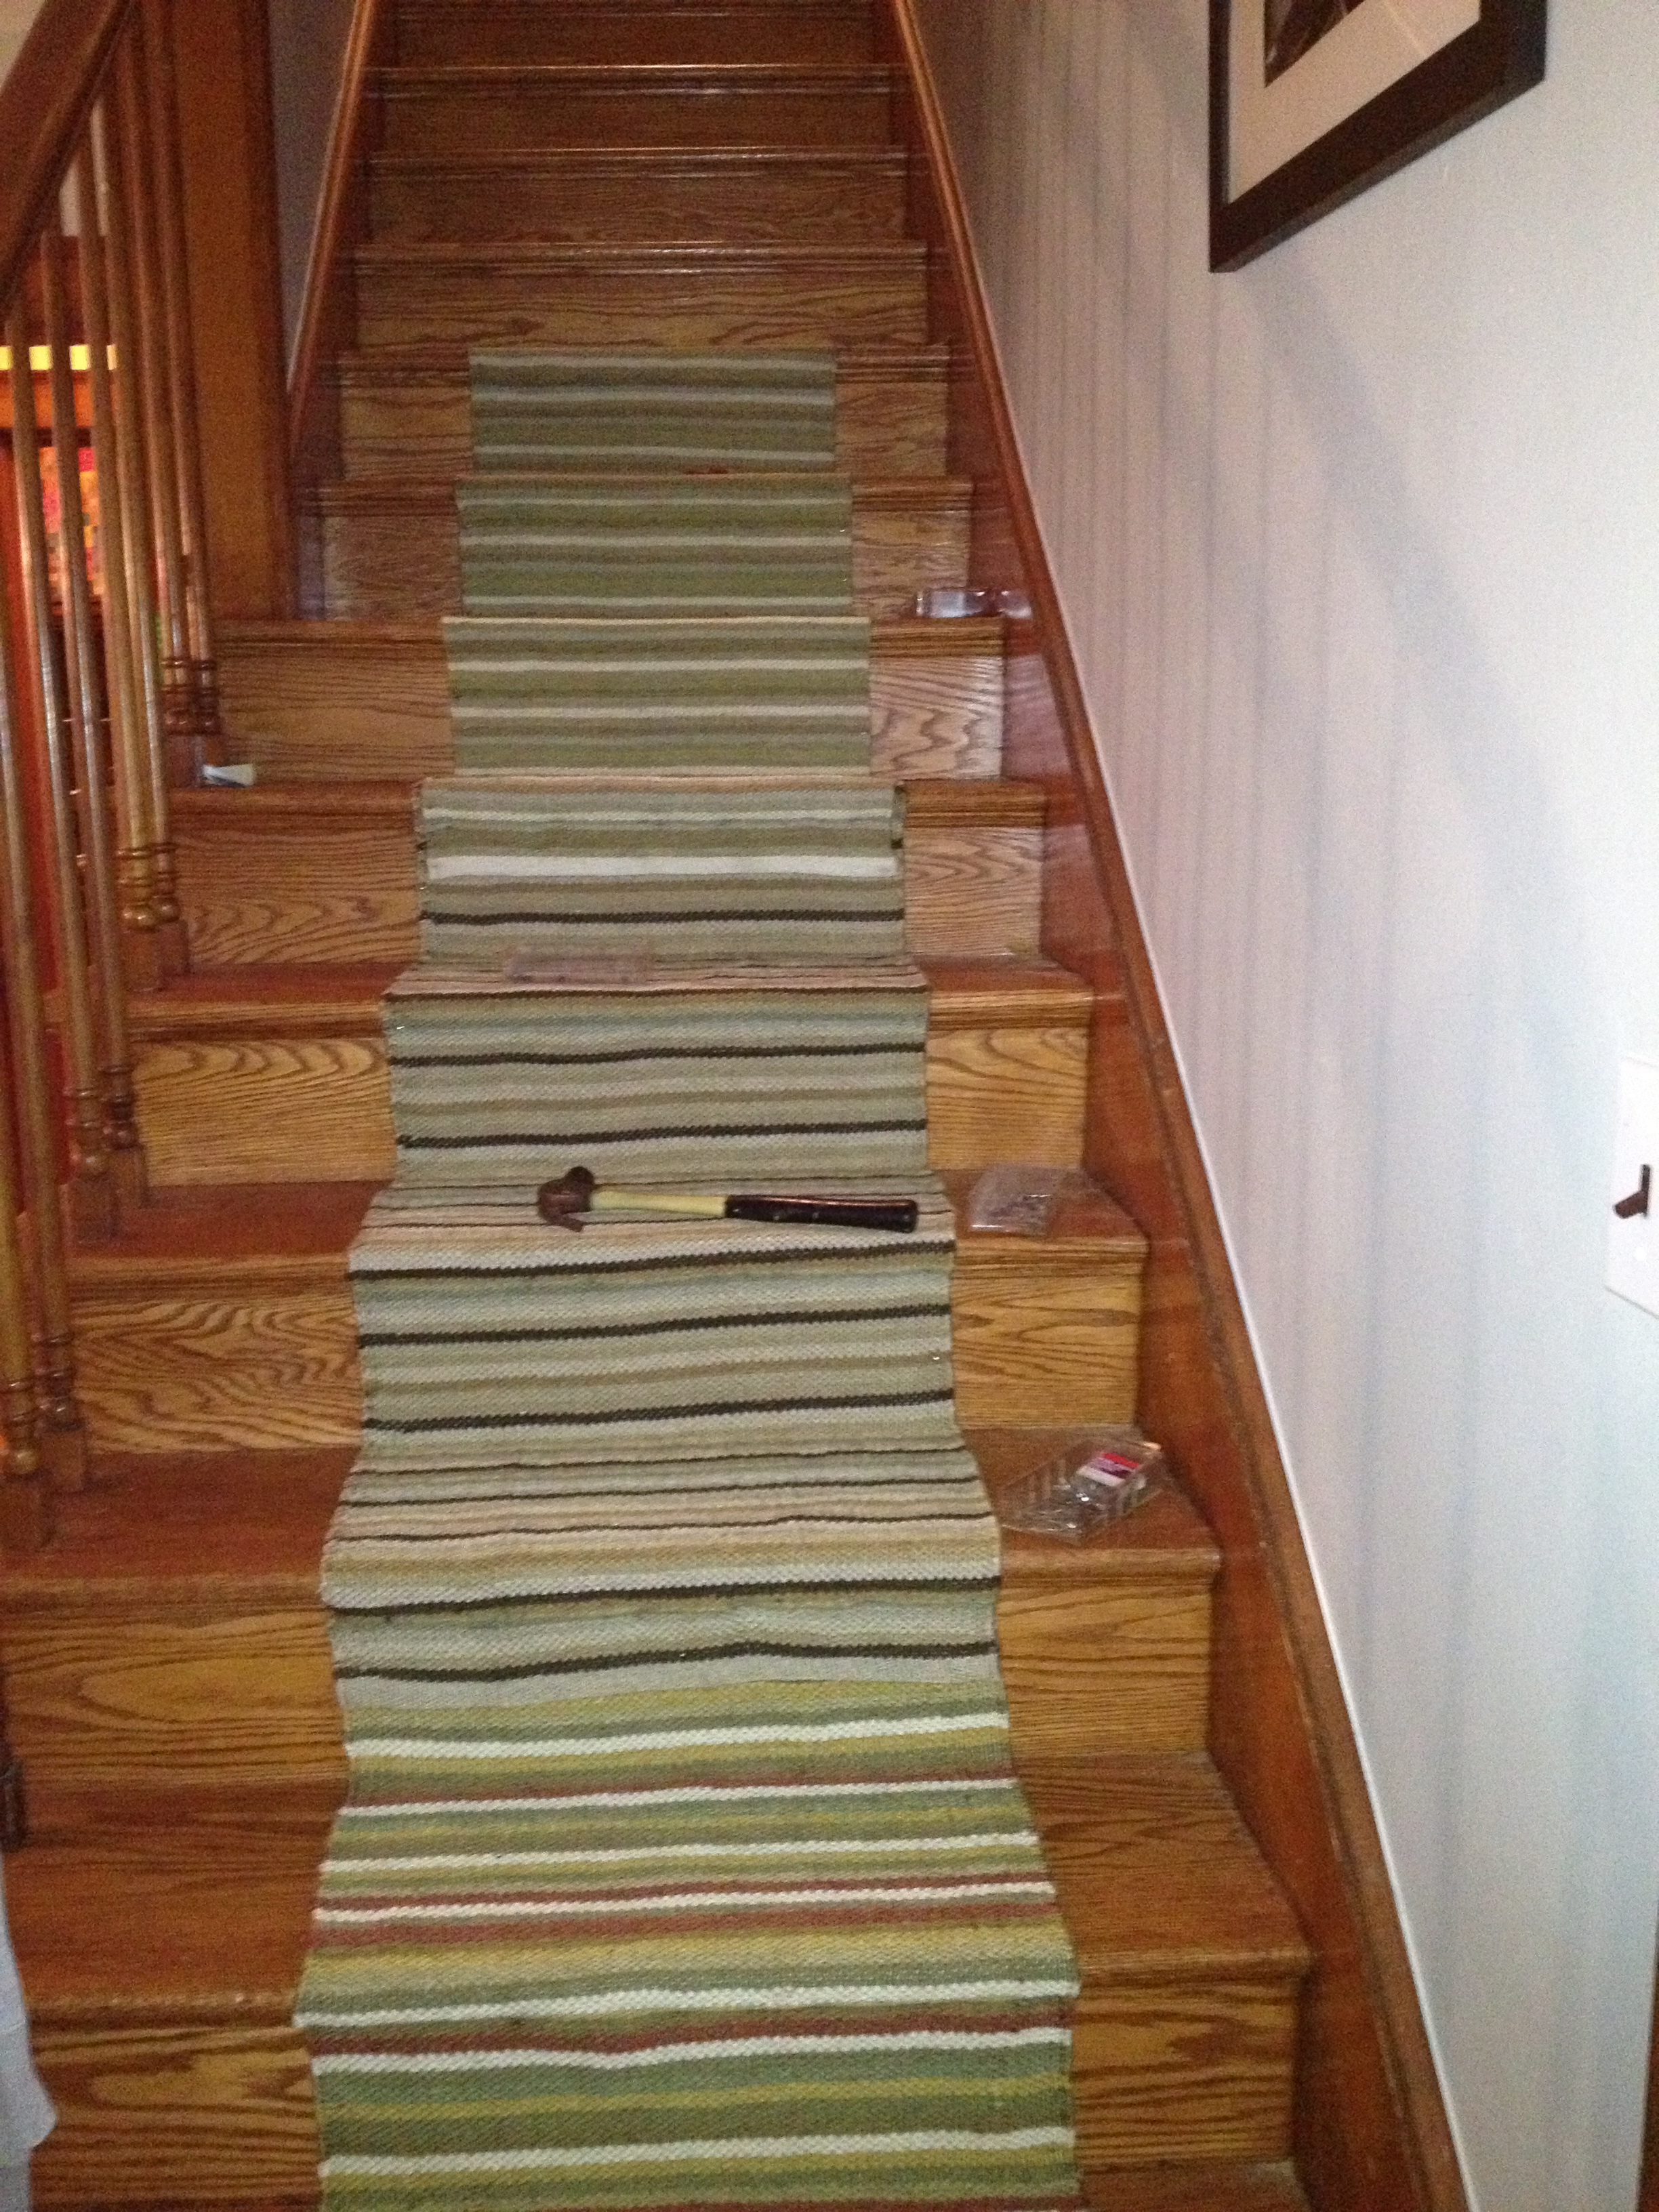 horizontal striped stairs Carpet on brown wooden staircase having ...